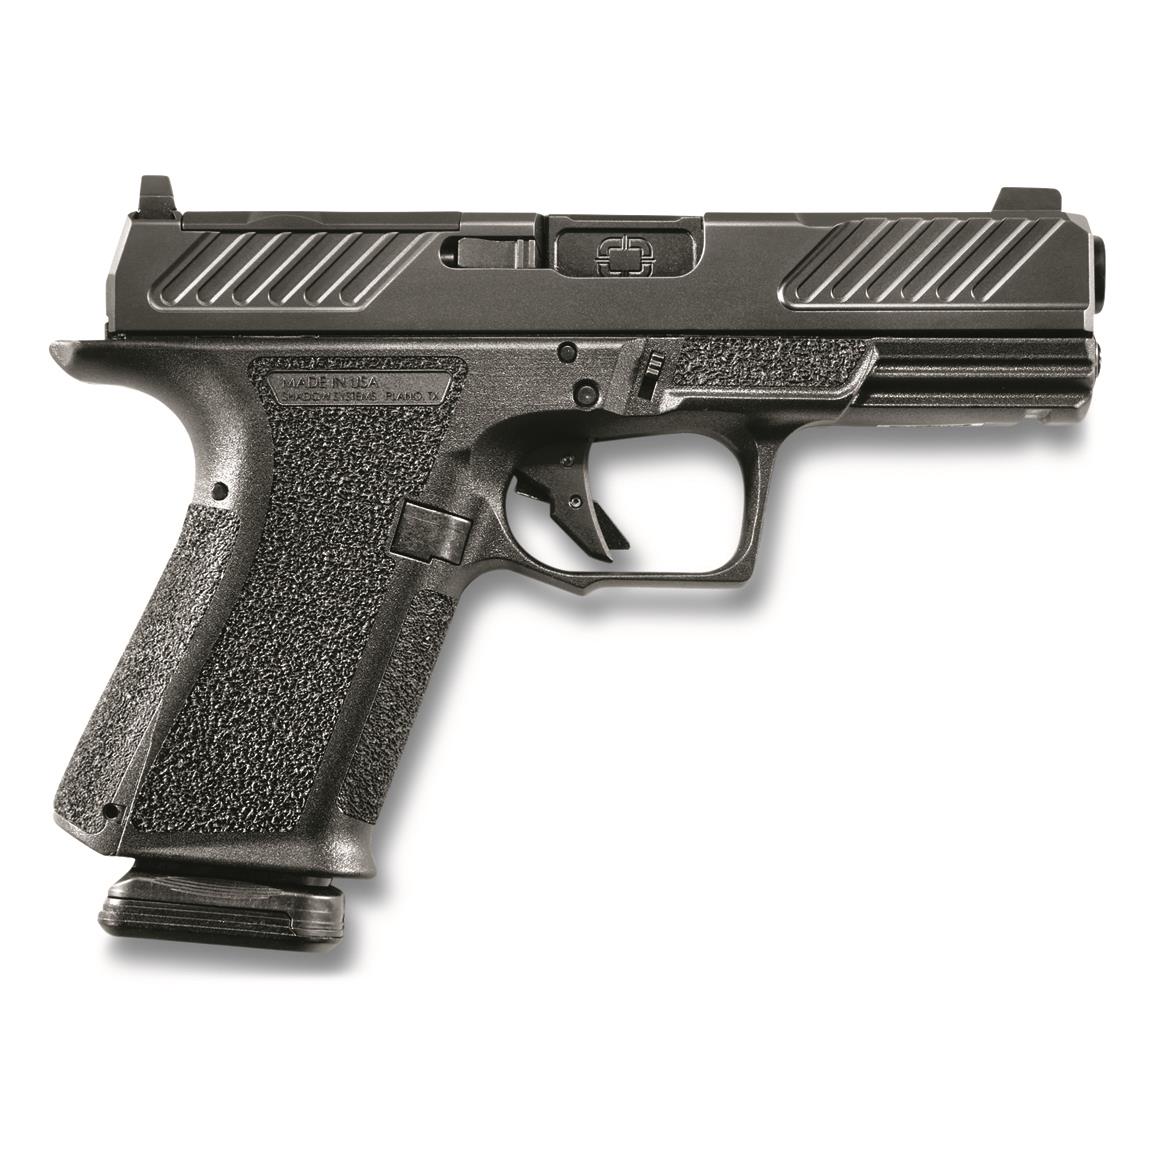 Shadow Systems MR920 Combat, Semi-automatic, 9mm, 4" Barrel, 15+1 Rounds